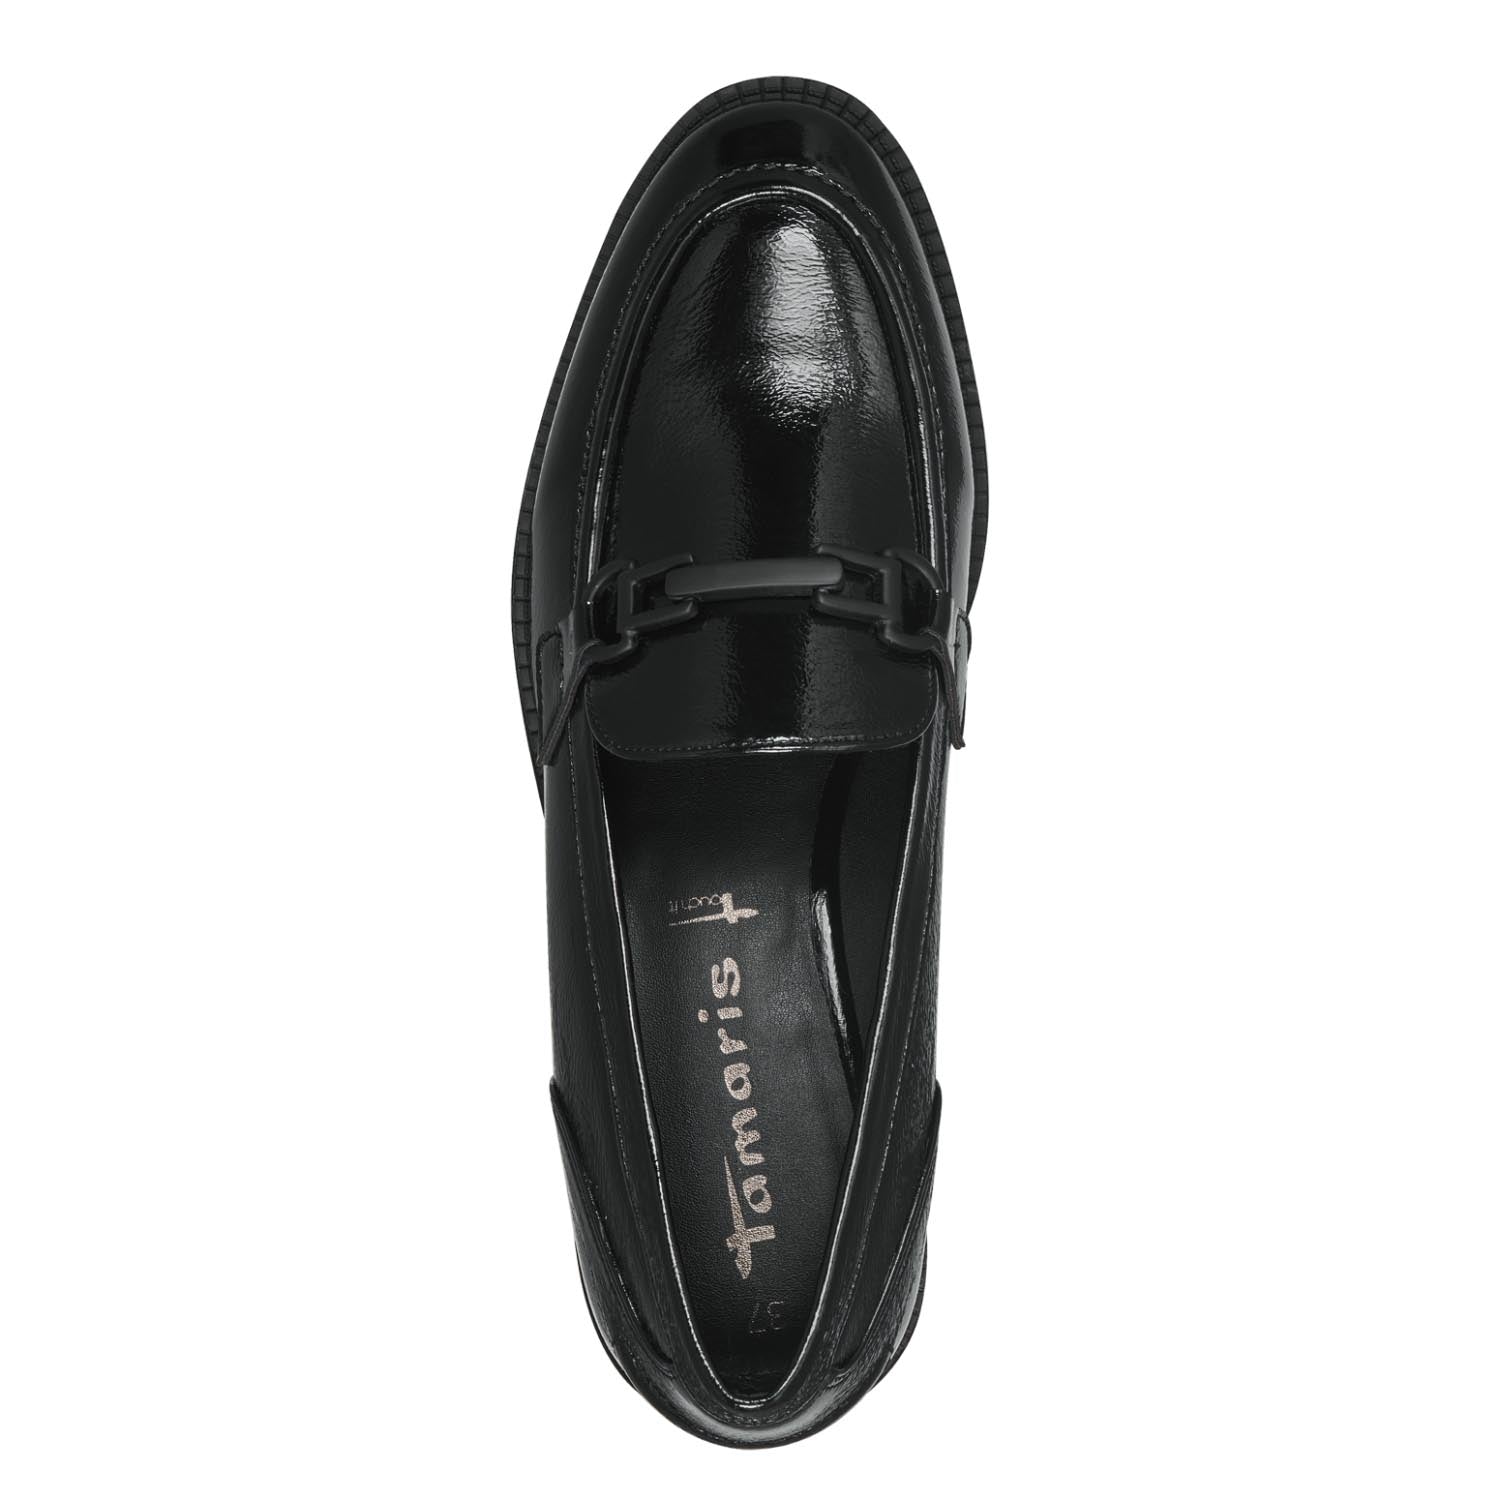 Front view of the Black Patent Loafer.